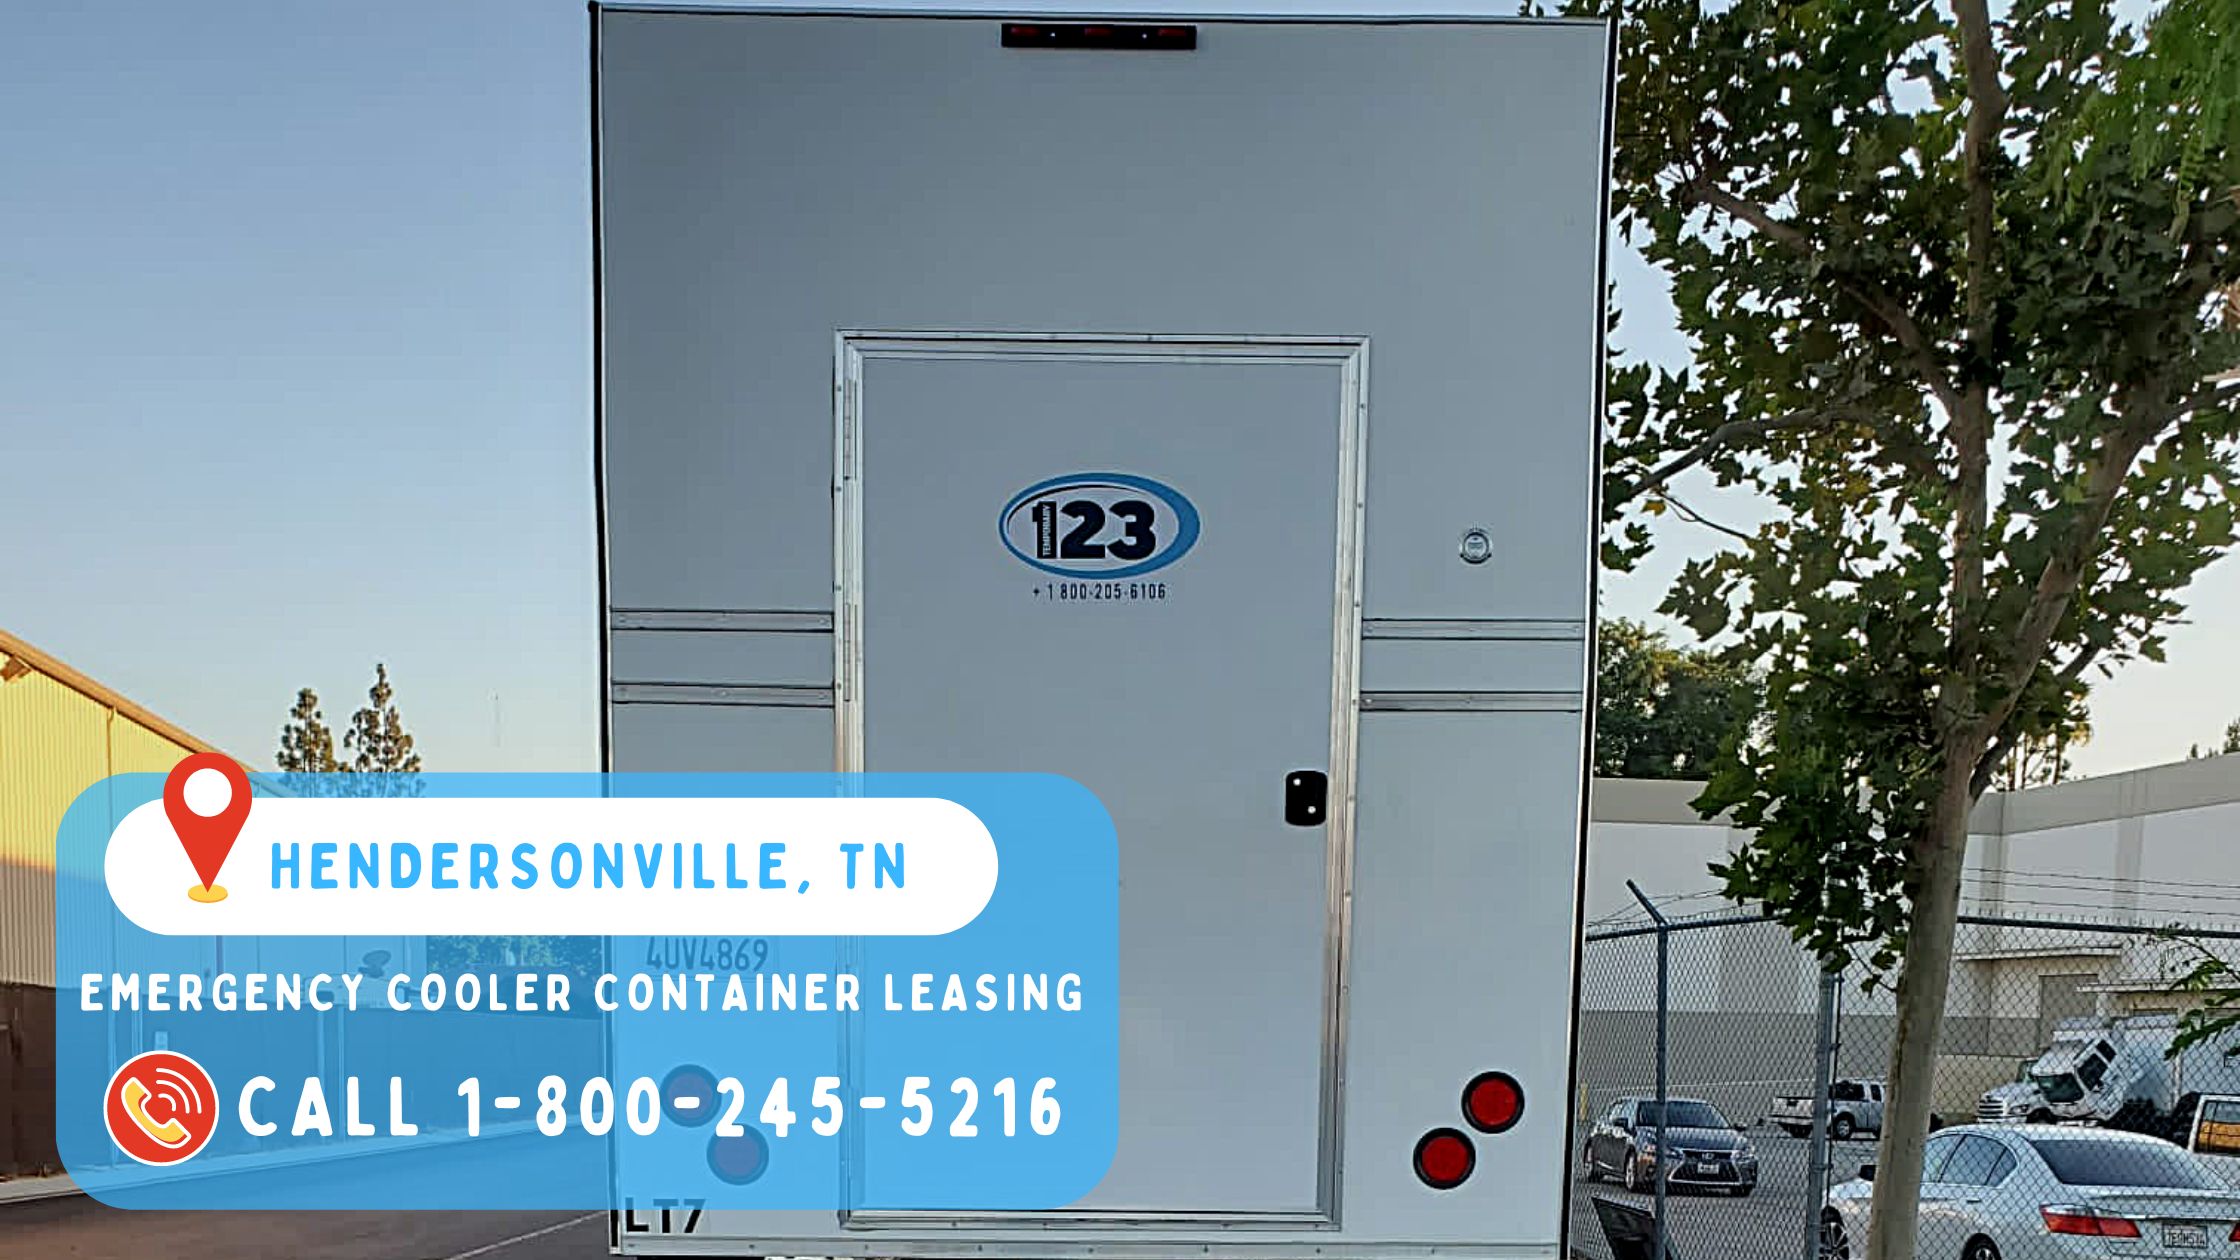 Emergency Cooler Container Leasing in Hendersonville